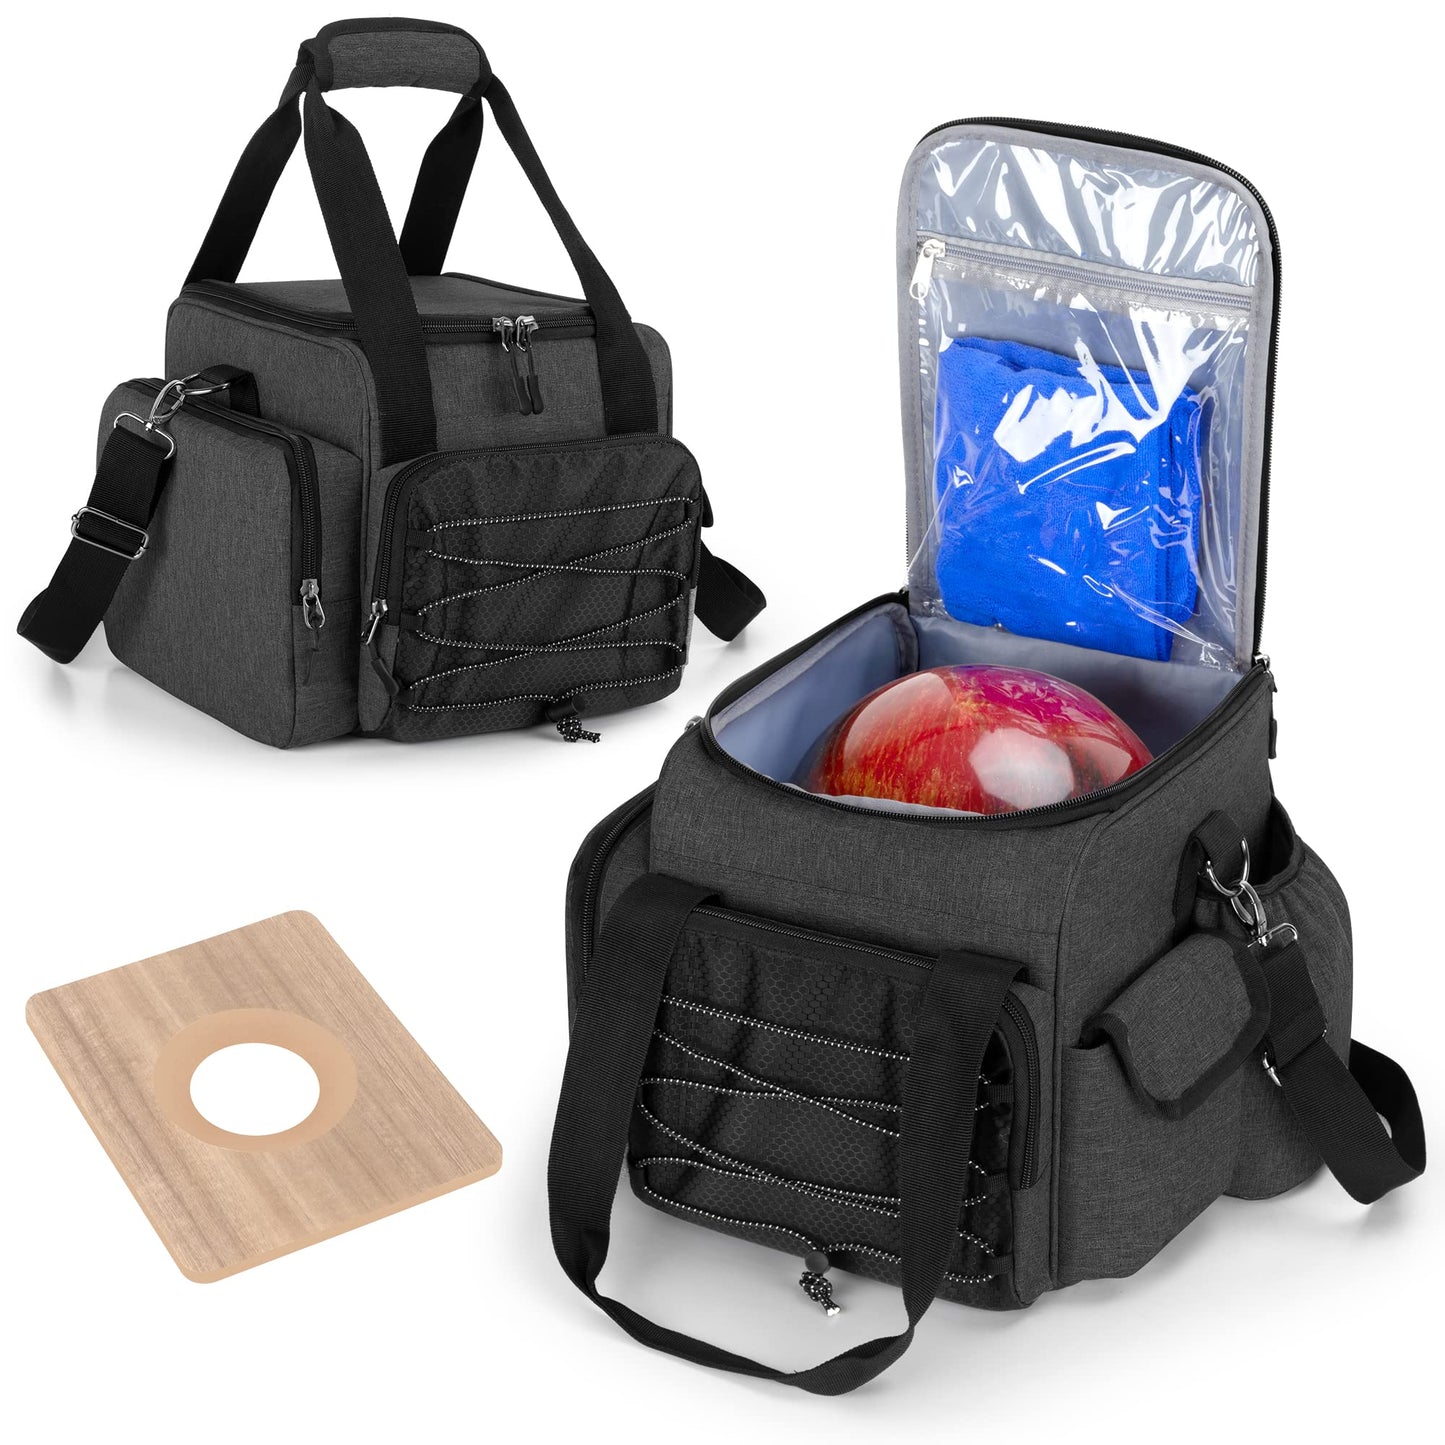 DSLEAF Bowling Ball Bag for Single Ball, Bowling Ball Tote Bag with Wooden Ball Holder and Extra Storage Pockets